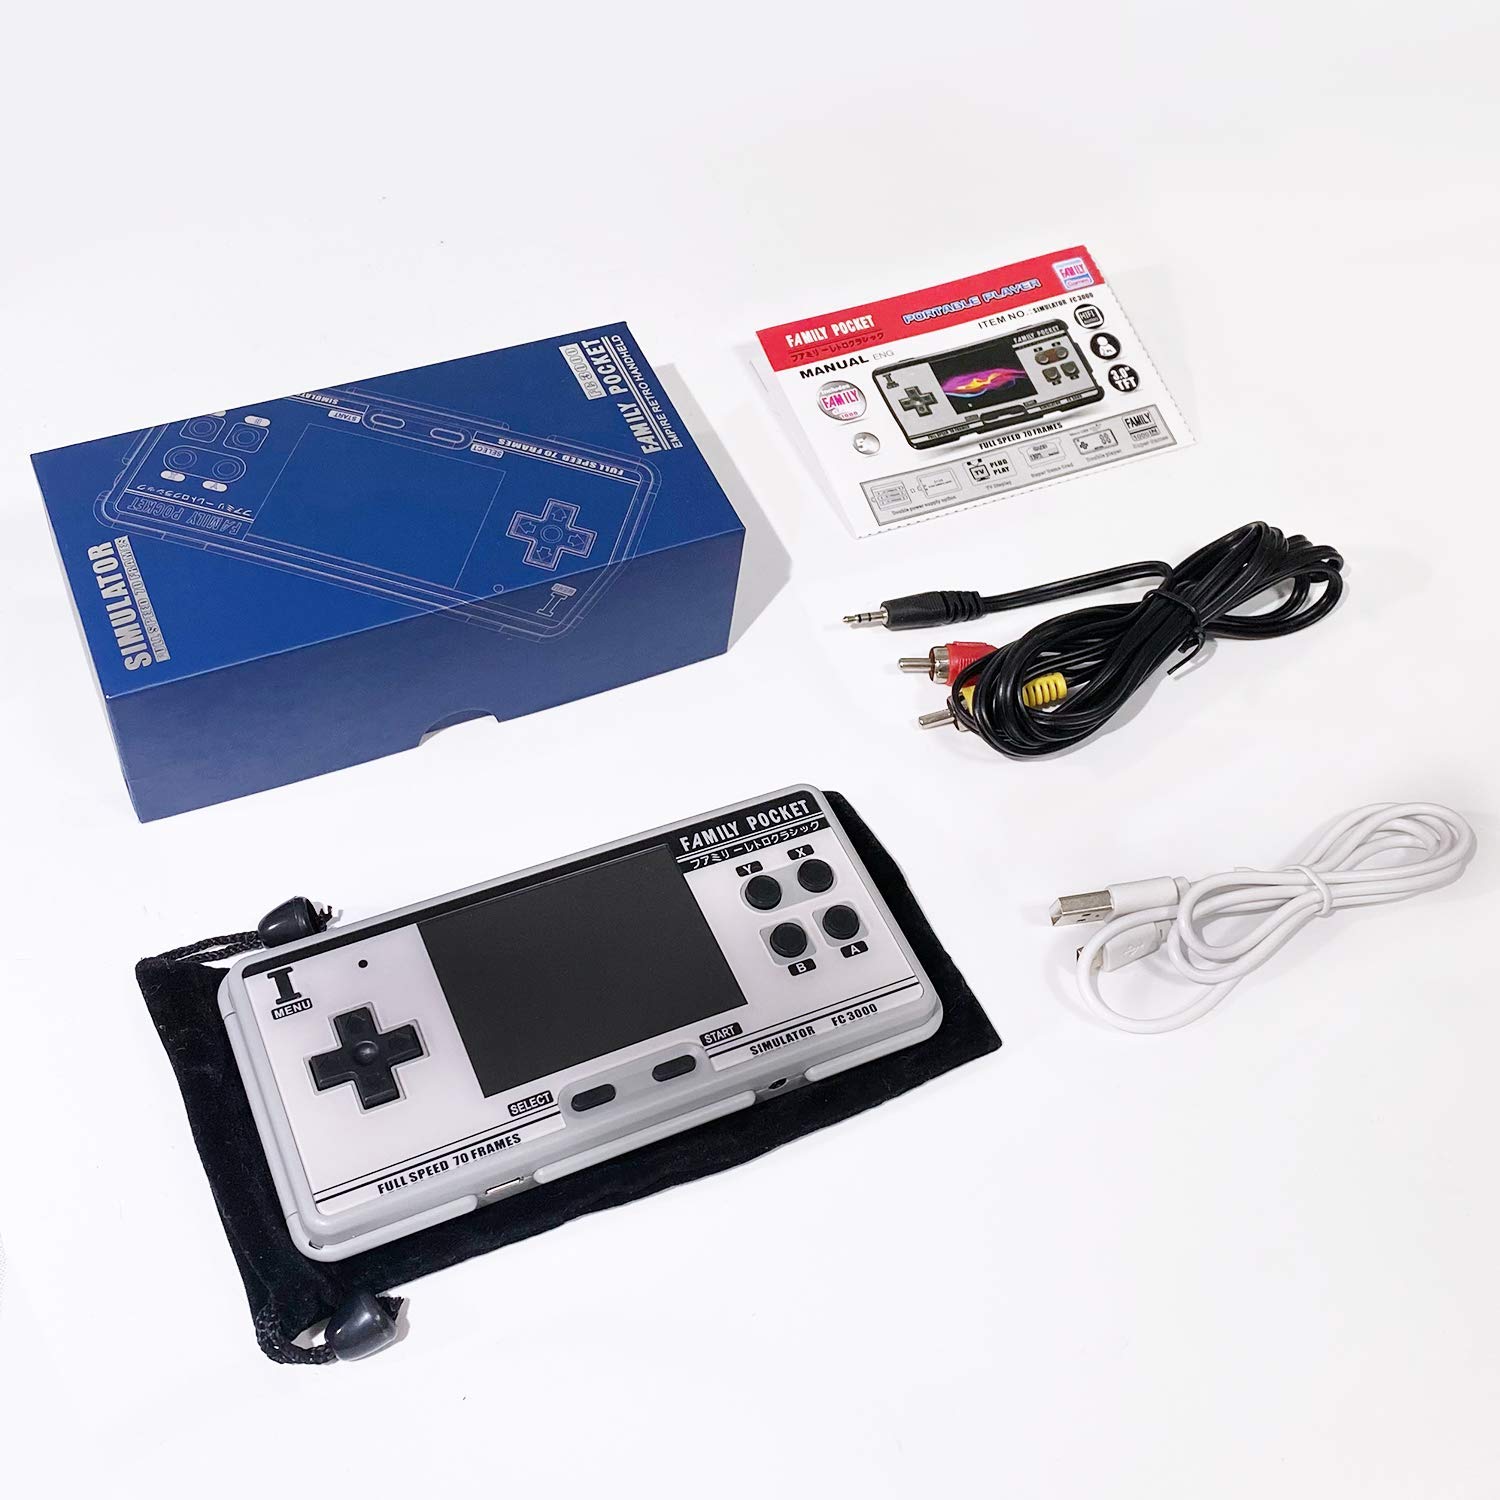 Handheld Retro Game Console, Retro Mini Game Player with 1500 Classic FC Games,3.0 Inch Screen 1800mAh Rechargeable Battery Portable Game Console Support TV Connection.